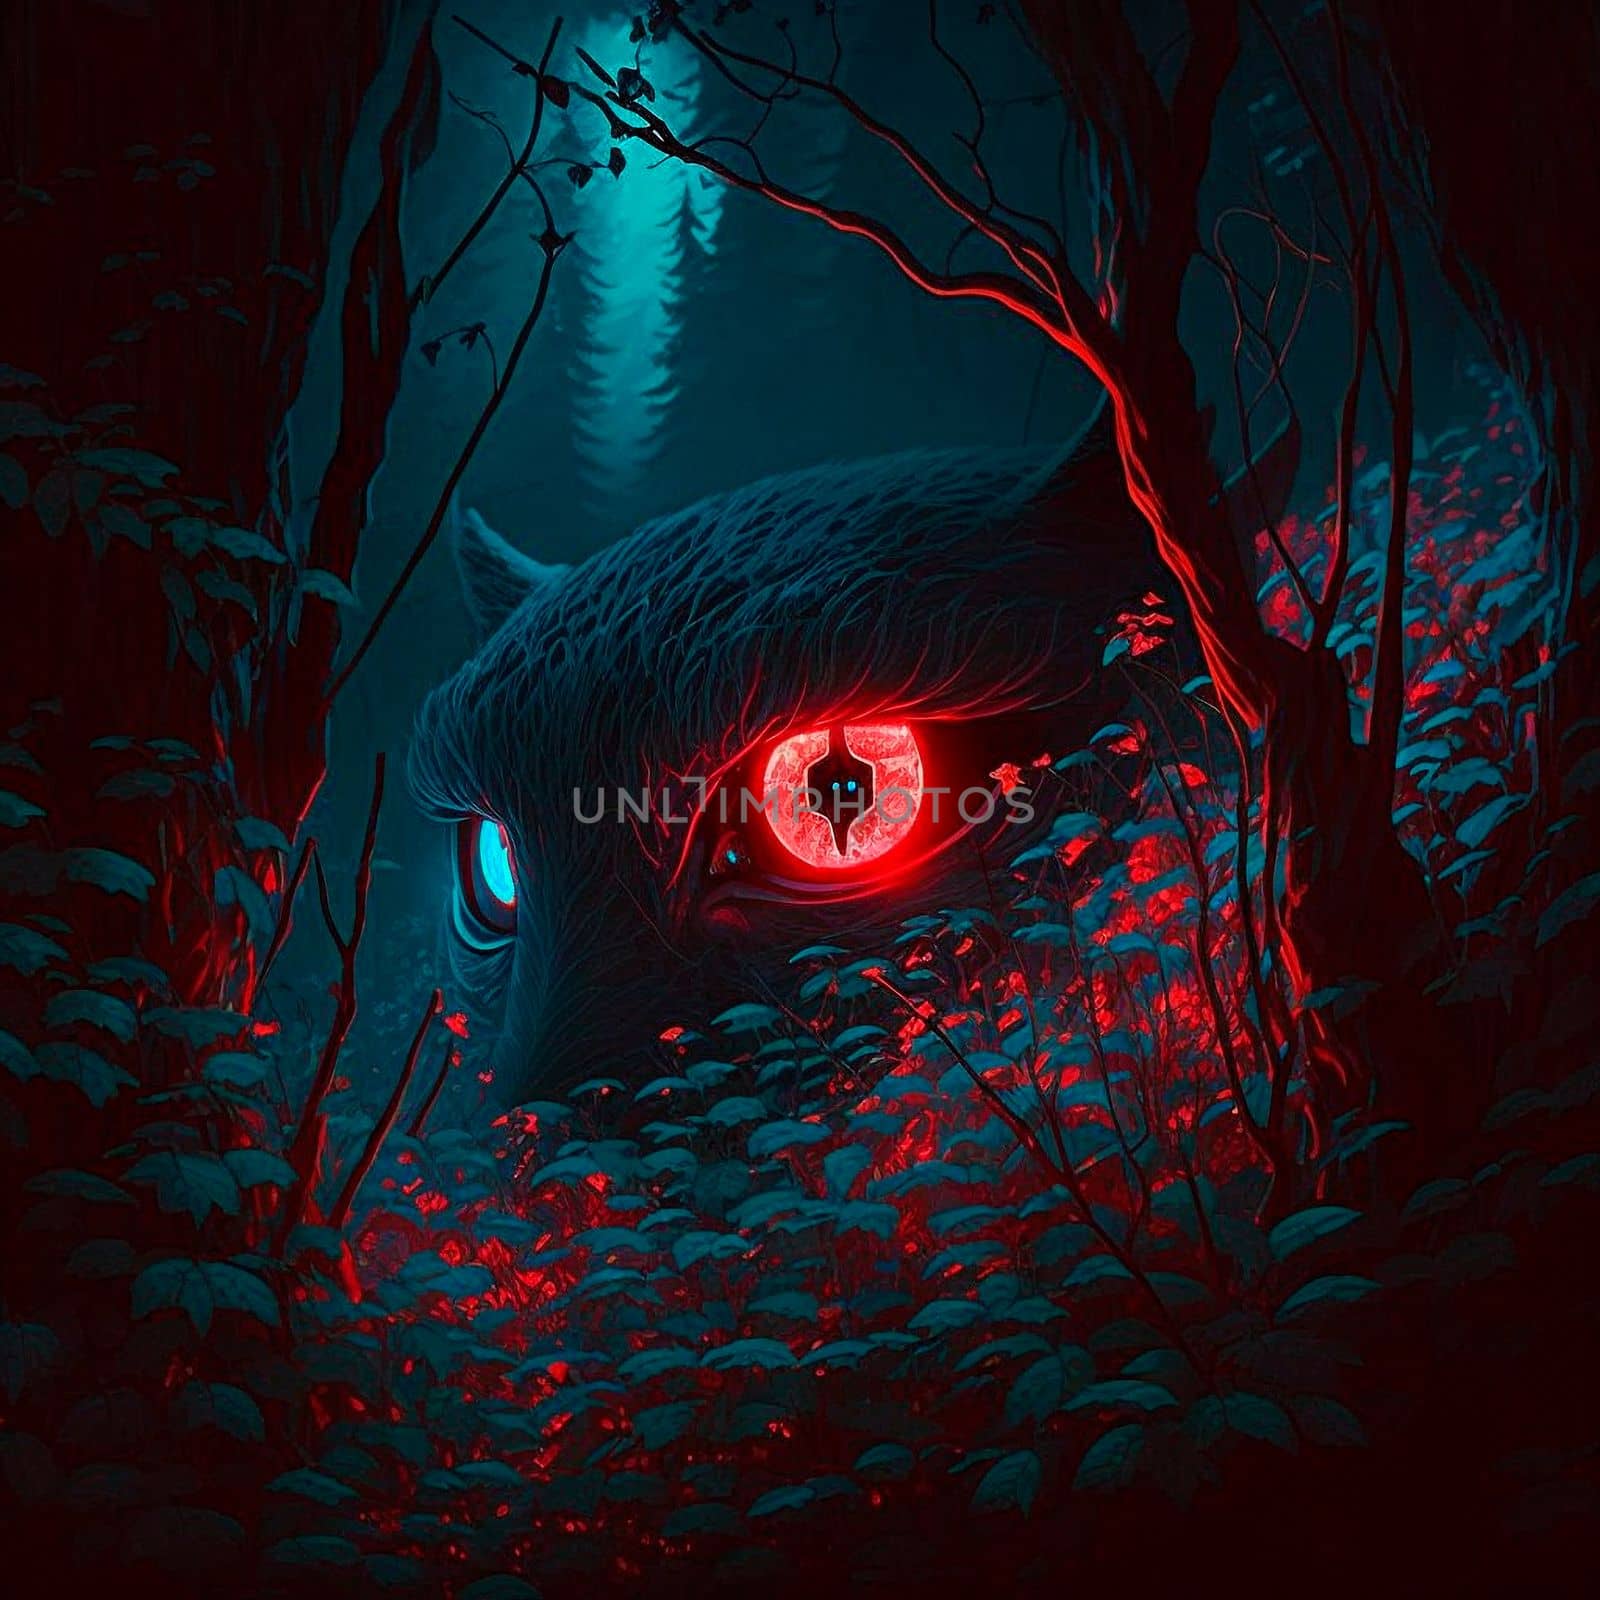 Big red eyes against the background of a gloomy mystical fores. High quality illustration